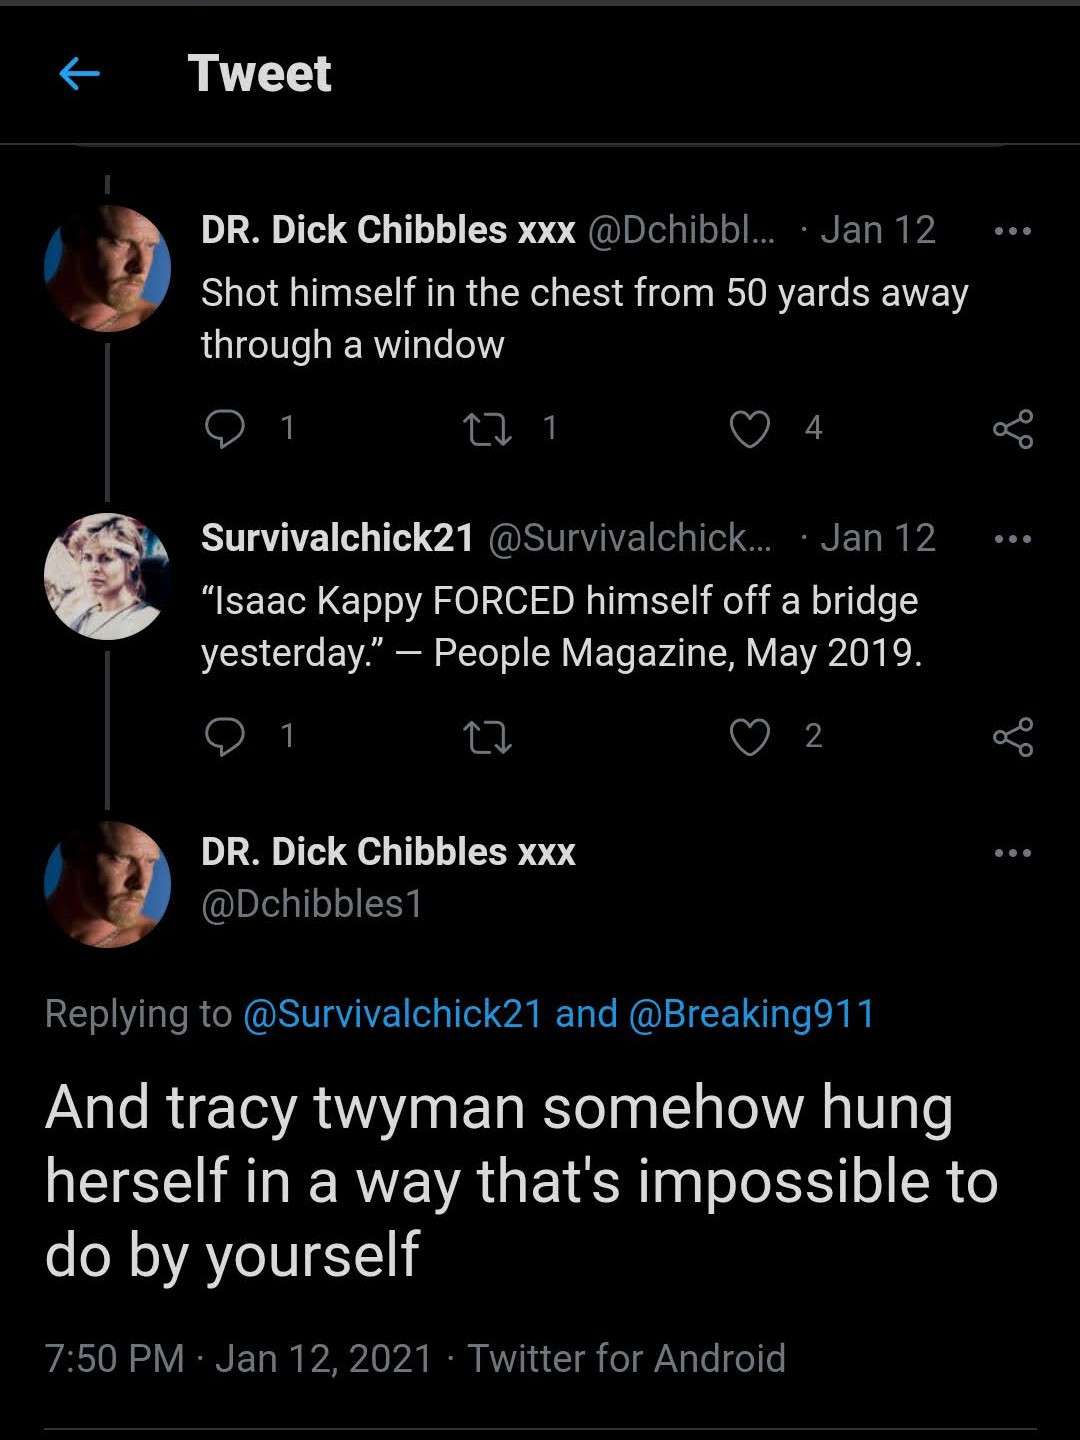 DR. Dick Chibbles xxx @Dchibbles1:  Shot himself in the chest from 50 yards away through a window  Survivalchick21 @Survivalchick21:  “Isaac Kappy FORCED himself off a bridge yesterday.—  People Magazine, May 2019.  DR. Dick Chibbles xxx: @Dchibbles1  Replying to @Survivalchick21 and @Breaking911  And tracy twyman somehow hung herself in a way that’s impossible to do by yourself  Jan 12, 2021